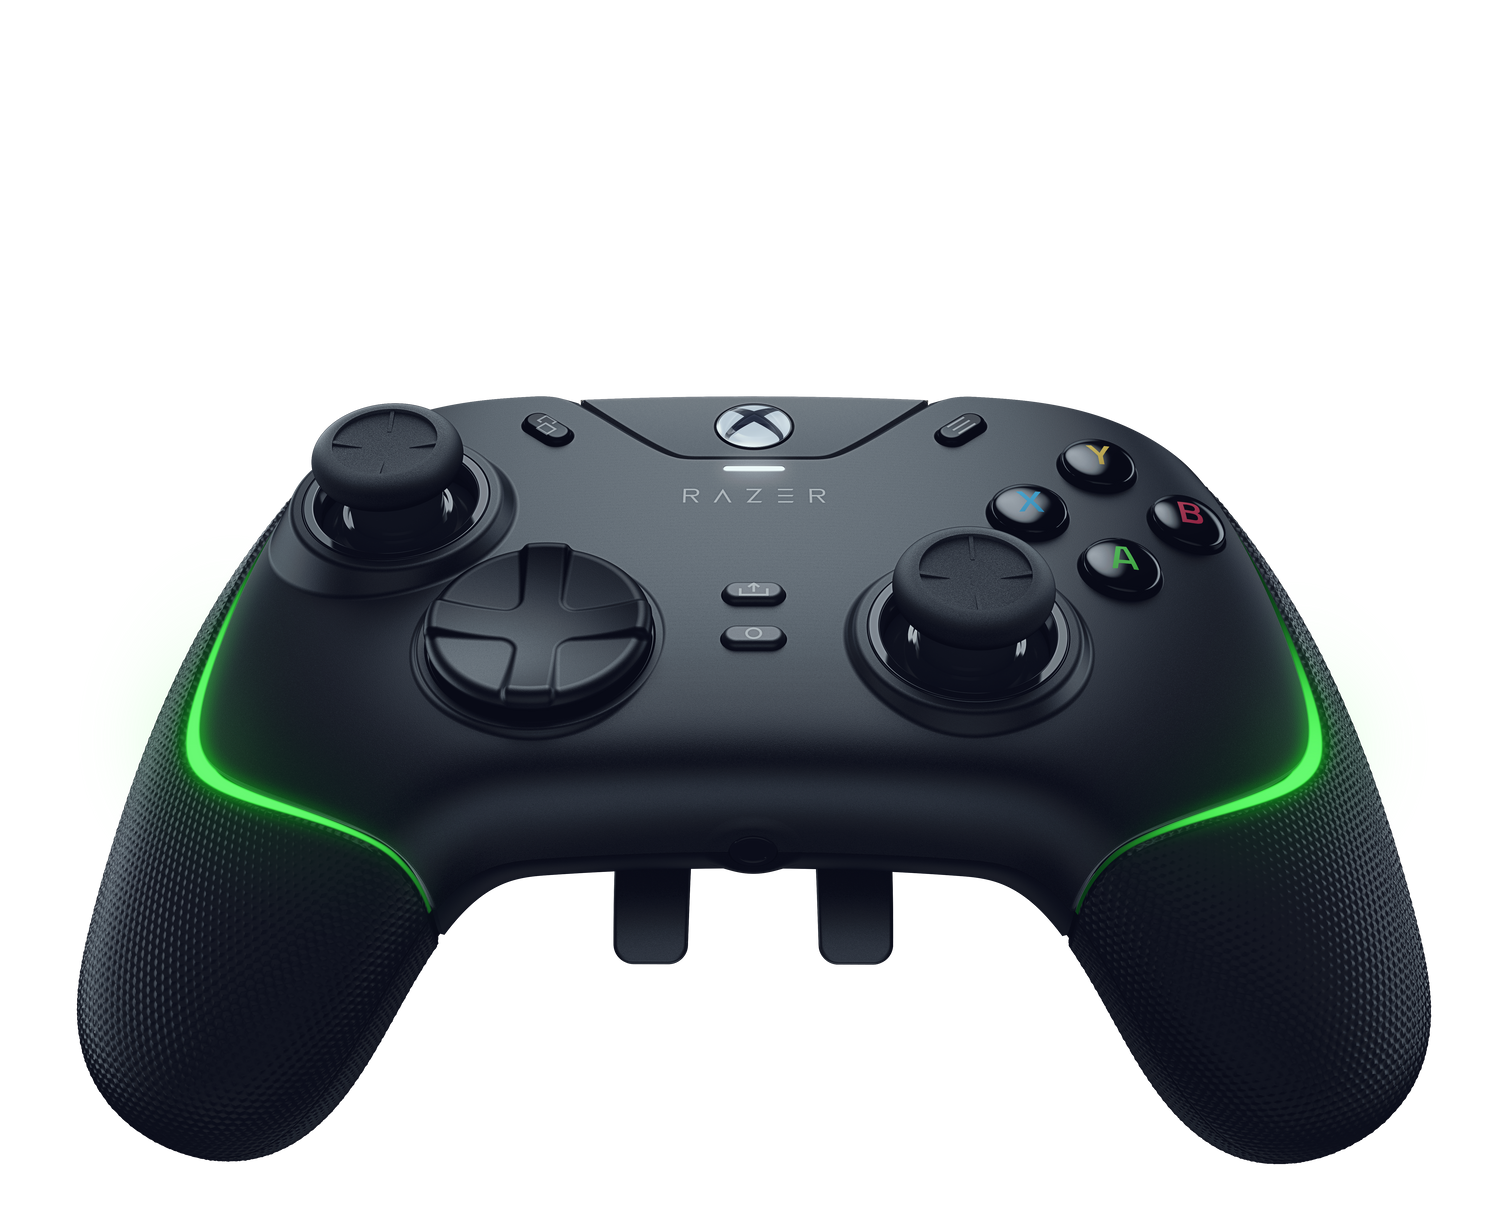 Outlaw garden Buzz Razer Wolverine V2 Chroma Wired Controller for Xbox Series X/S, Xbox One,  and PC